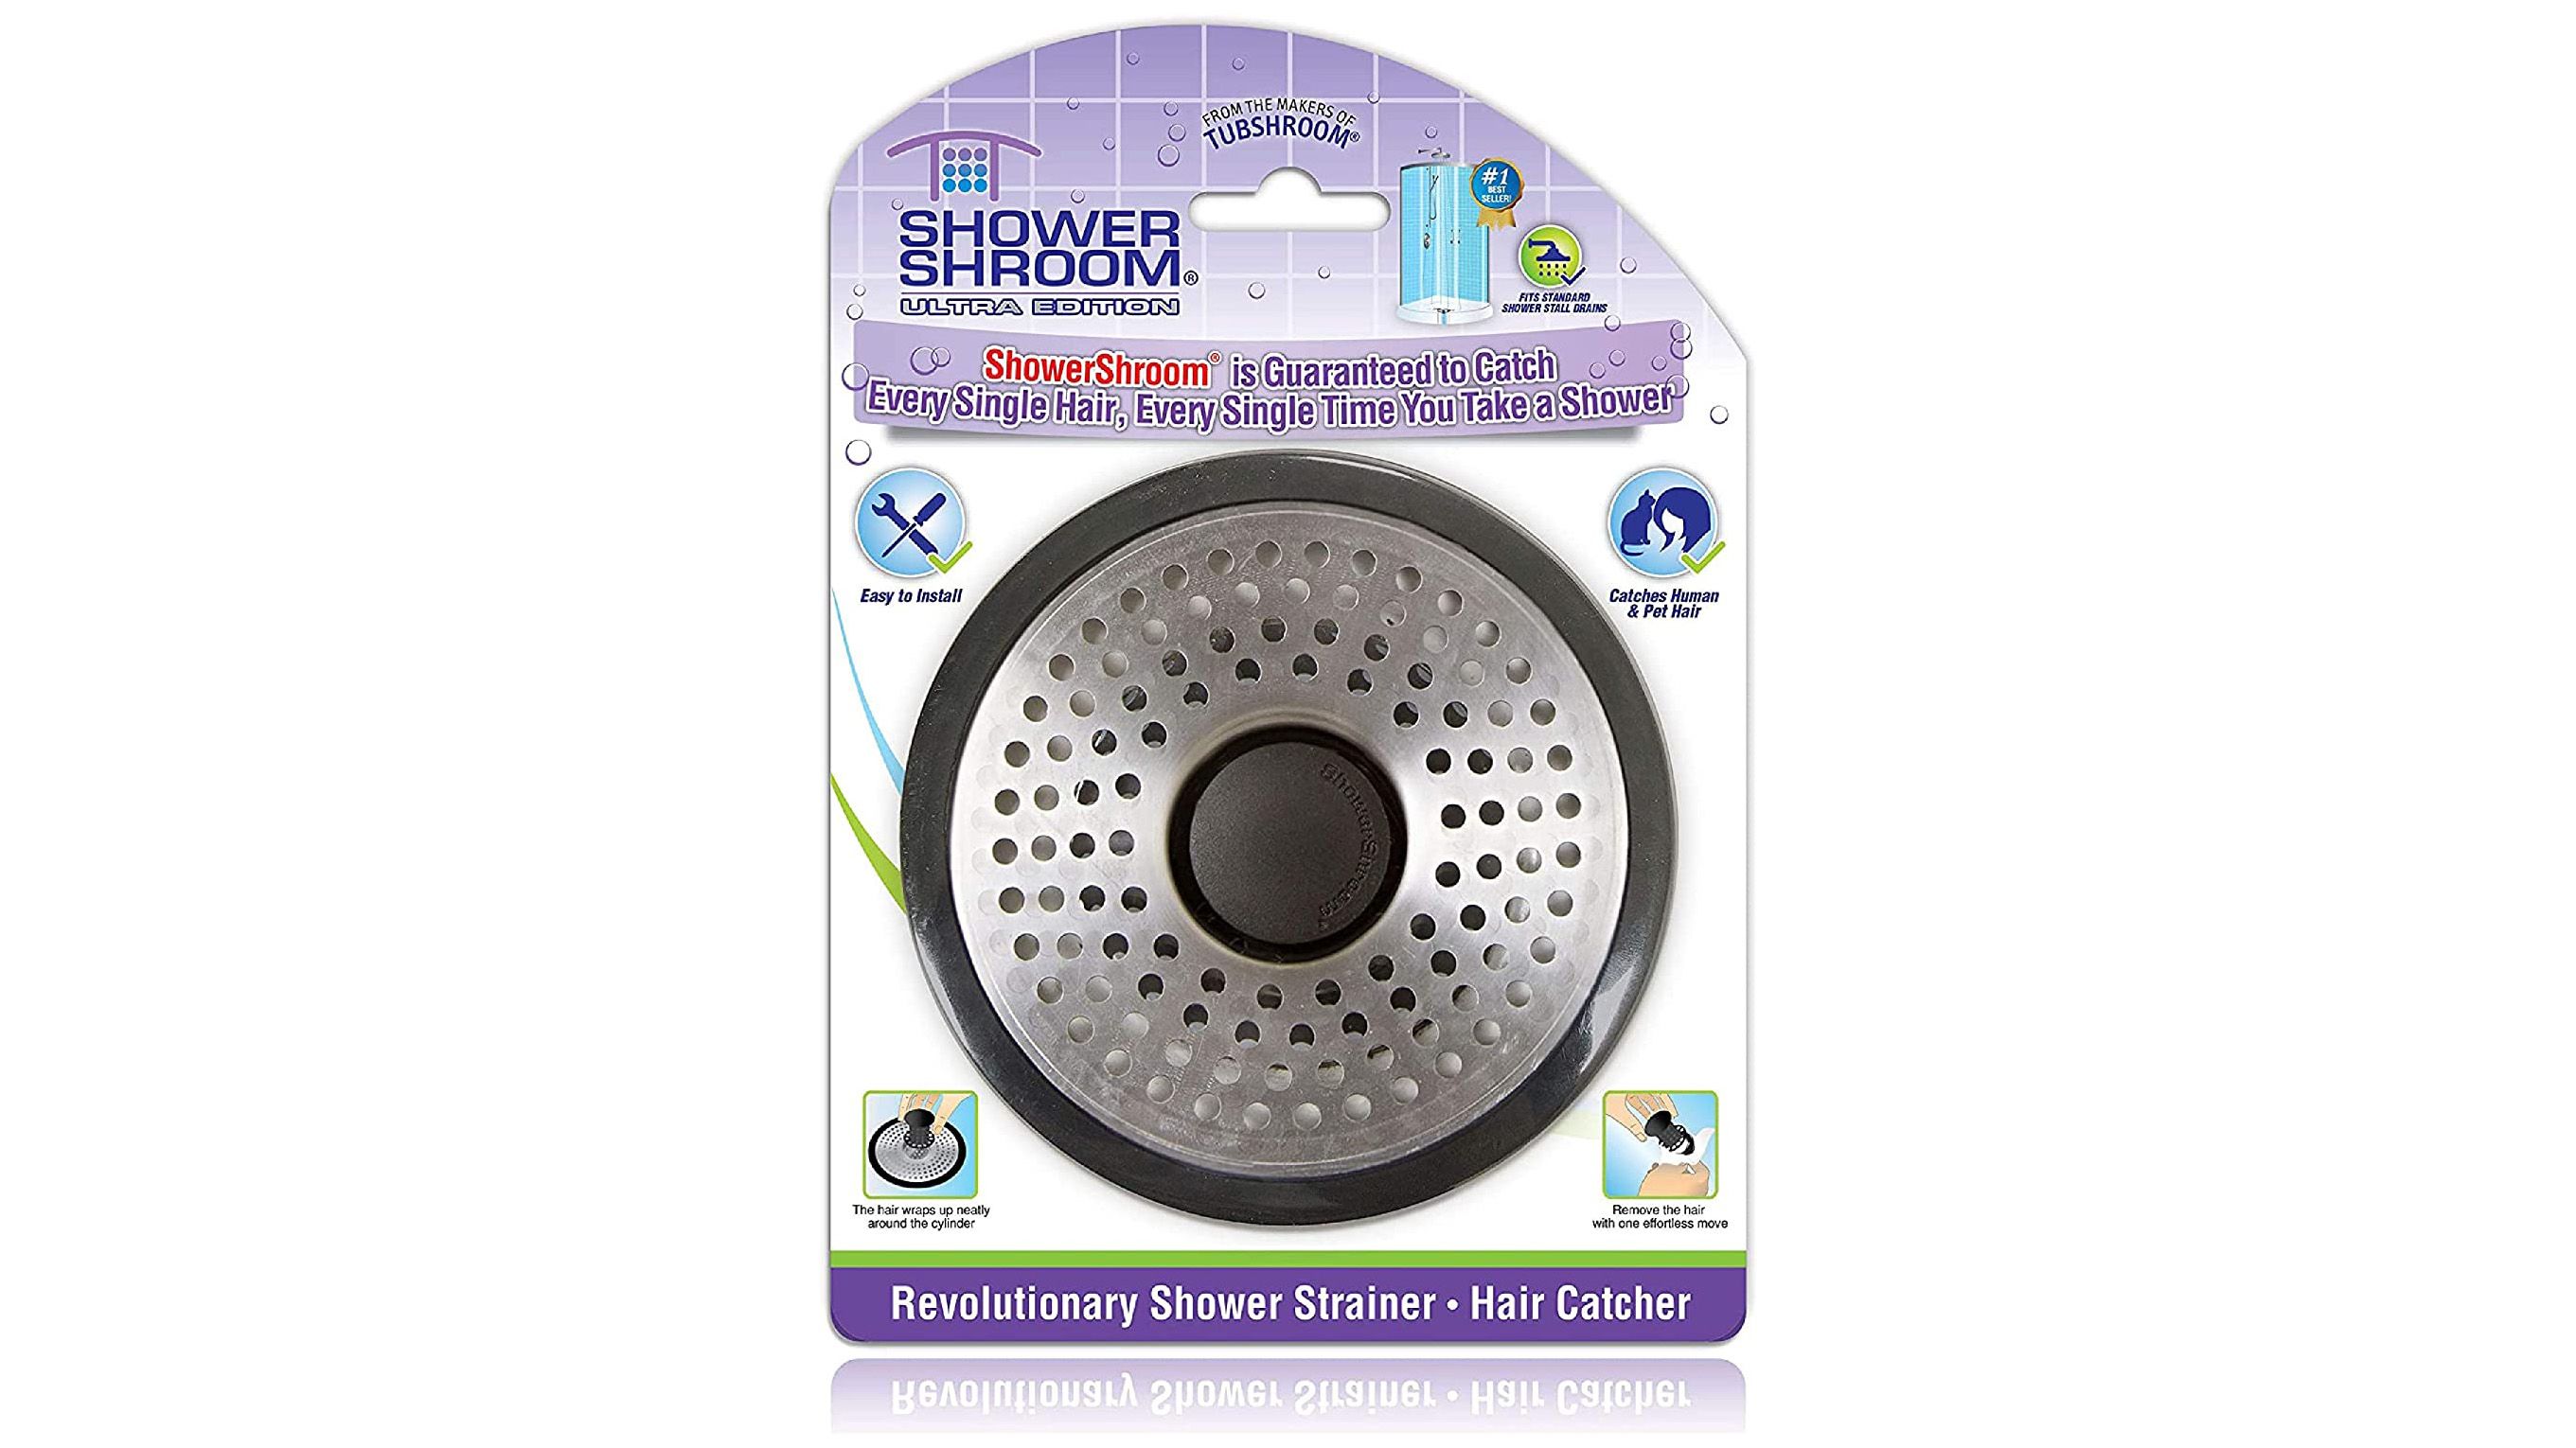 Tub Shroom strainer and hair catcher testing and review 